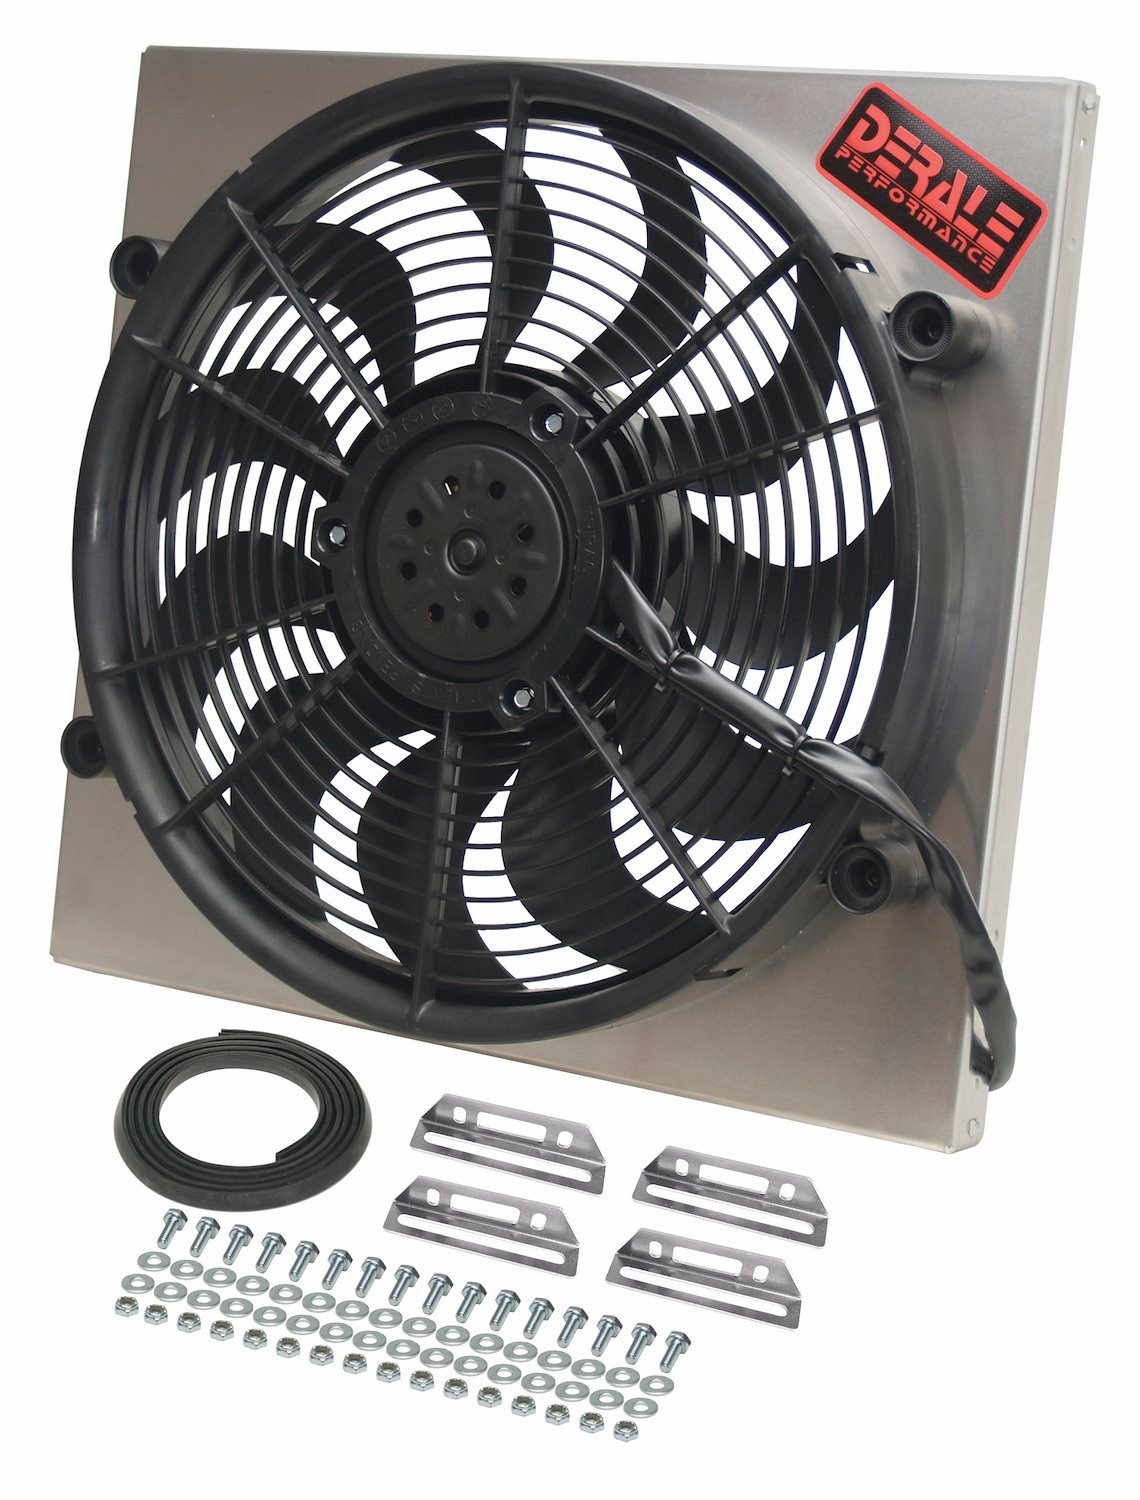 Dual Speed Electric Puller Fan with Aluminum Shroud